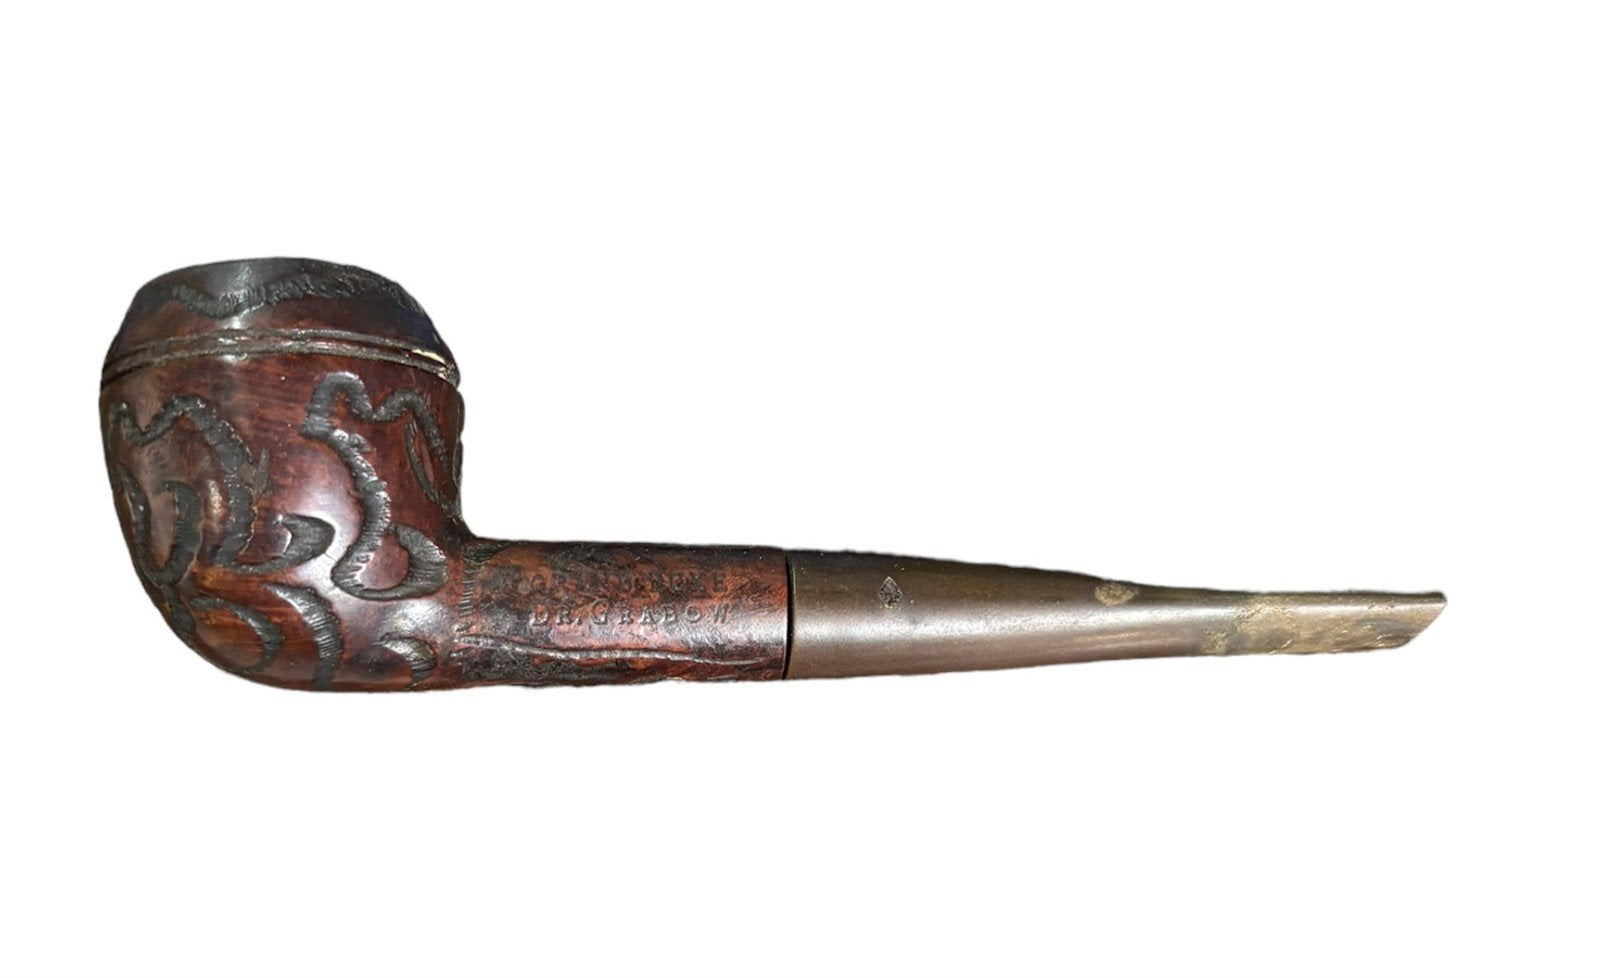 Pipe Wooden Dr. Grabow Grand Duke Display Tobacciana Vintage Imported Briar